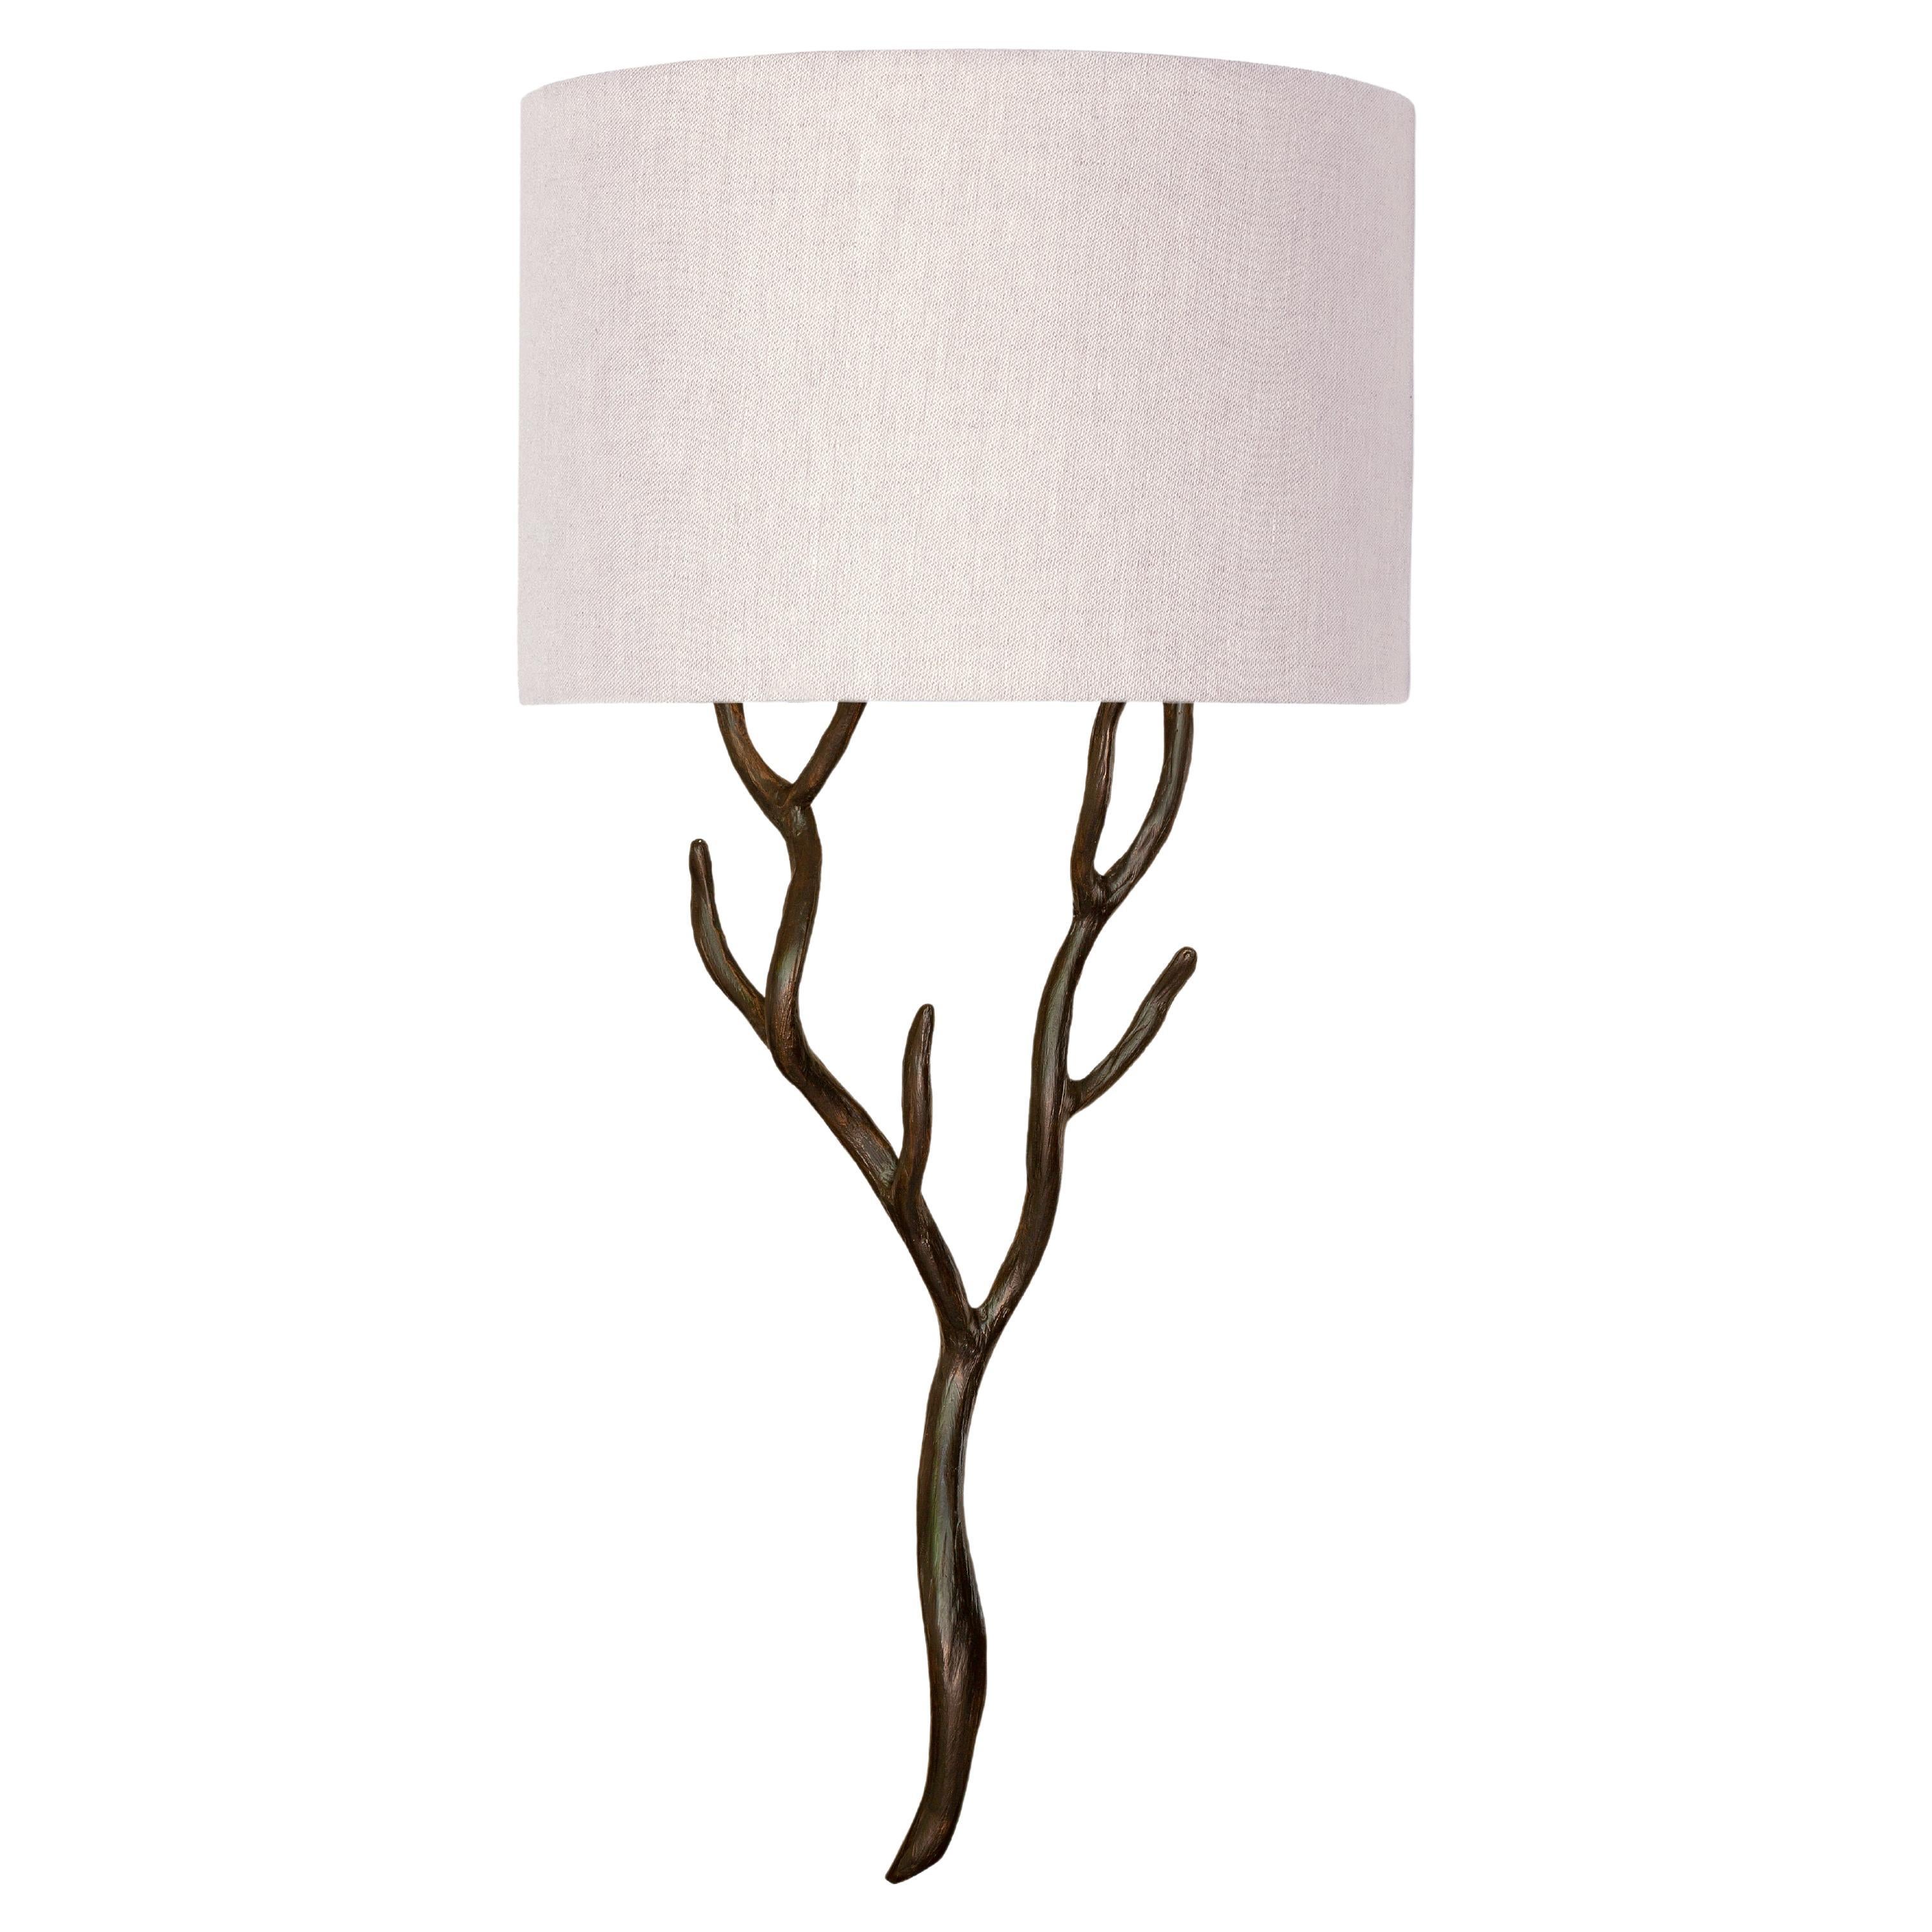 Organic Wall Light “Etna” in Forest Brown Finish, Benediko For Sale